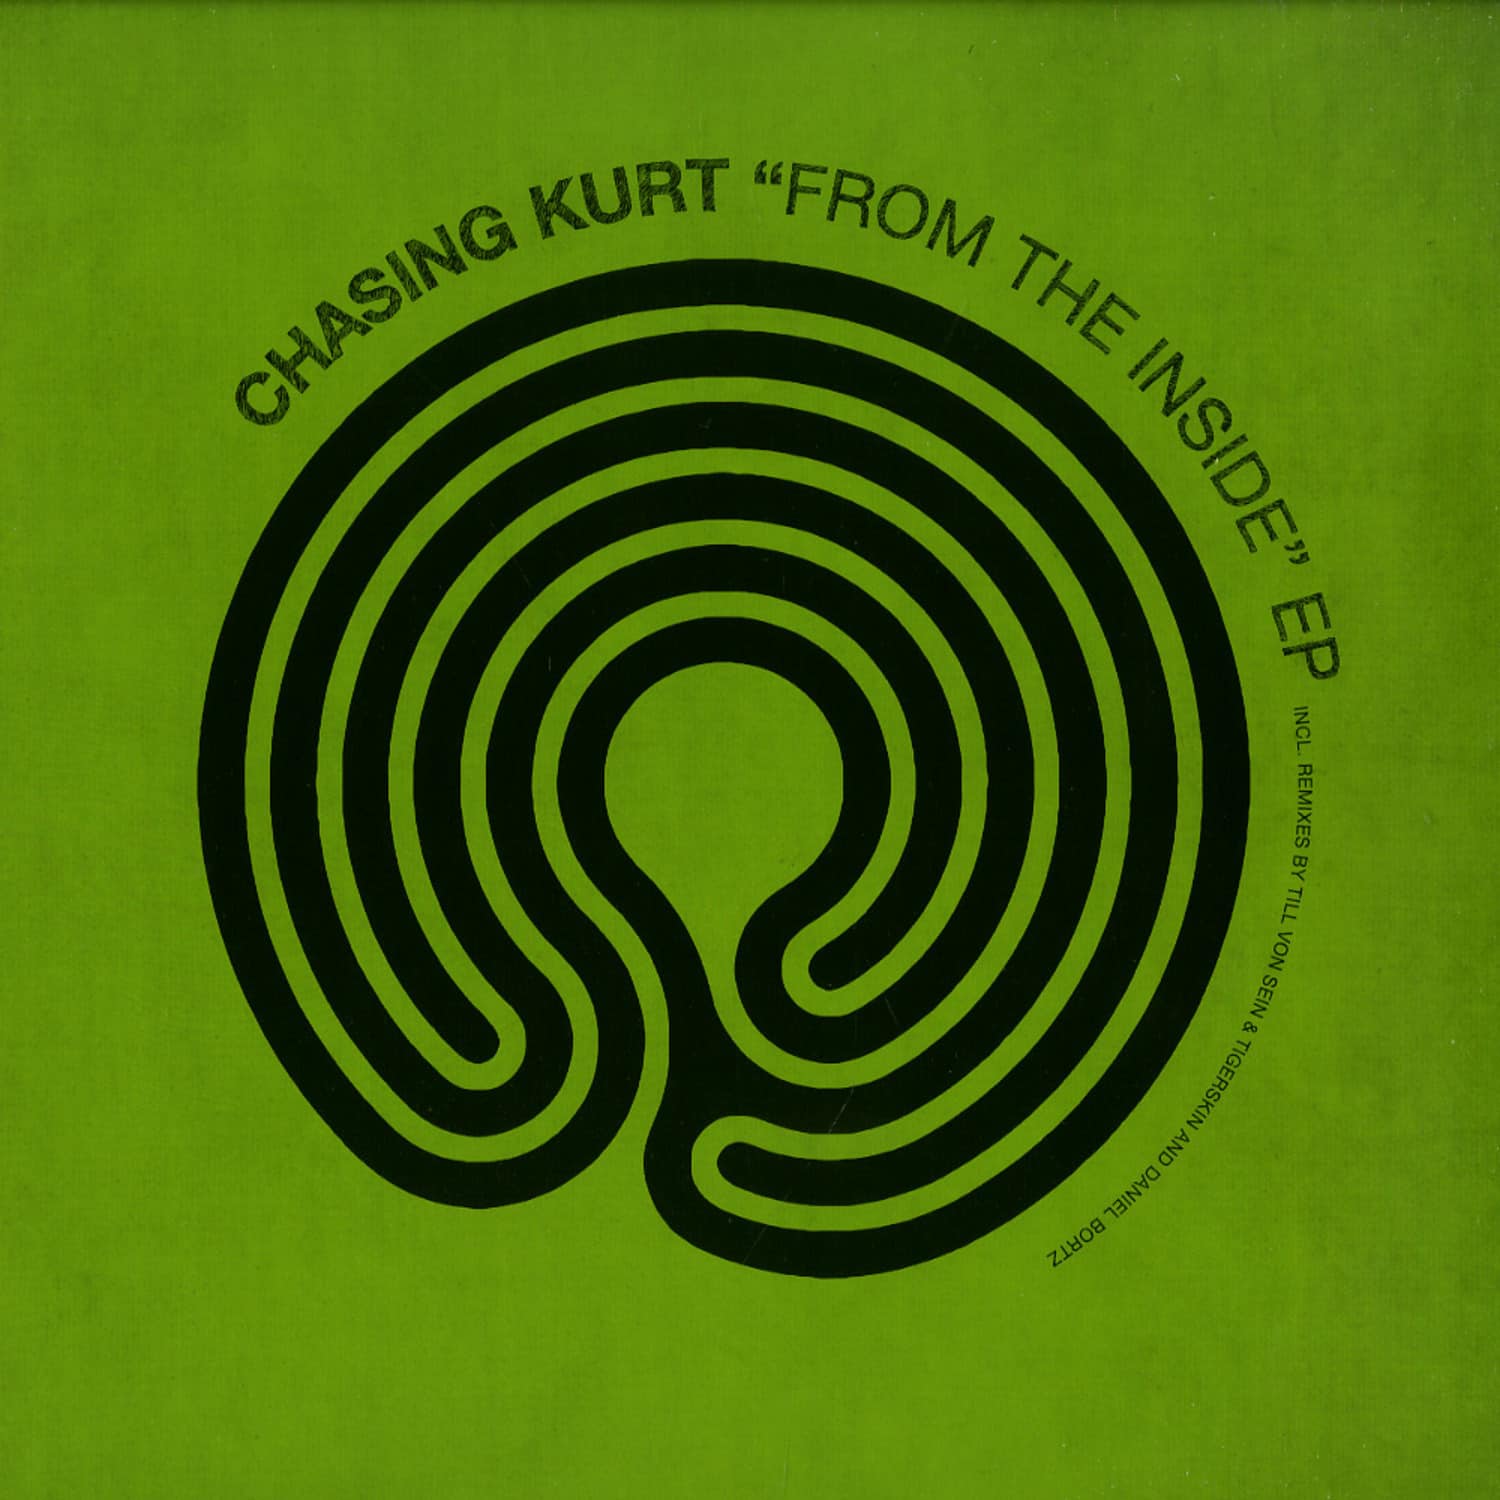 Chasing Kurt - FROM THE INSIDE EP